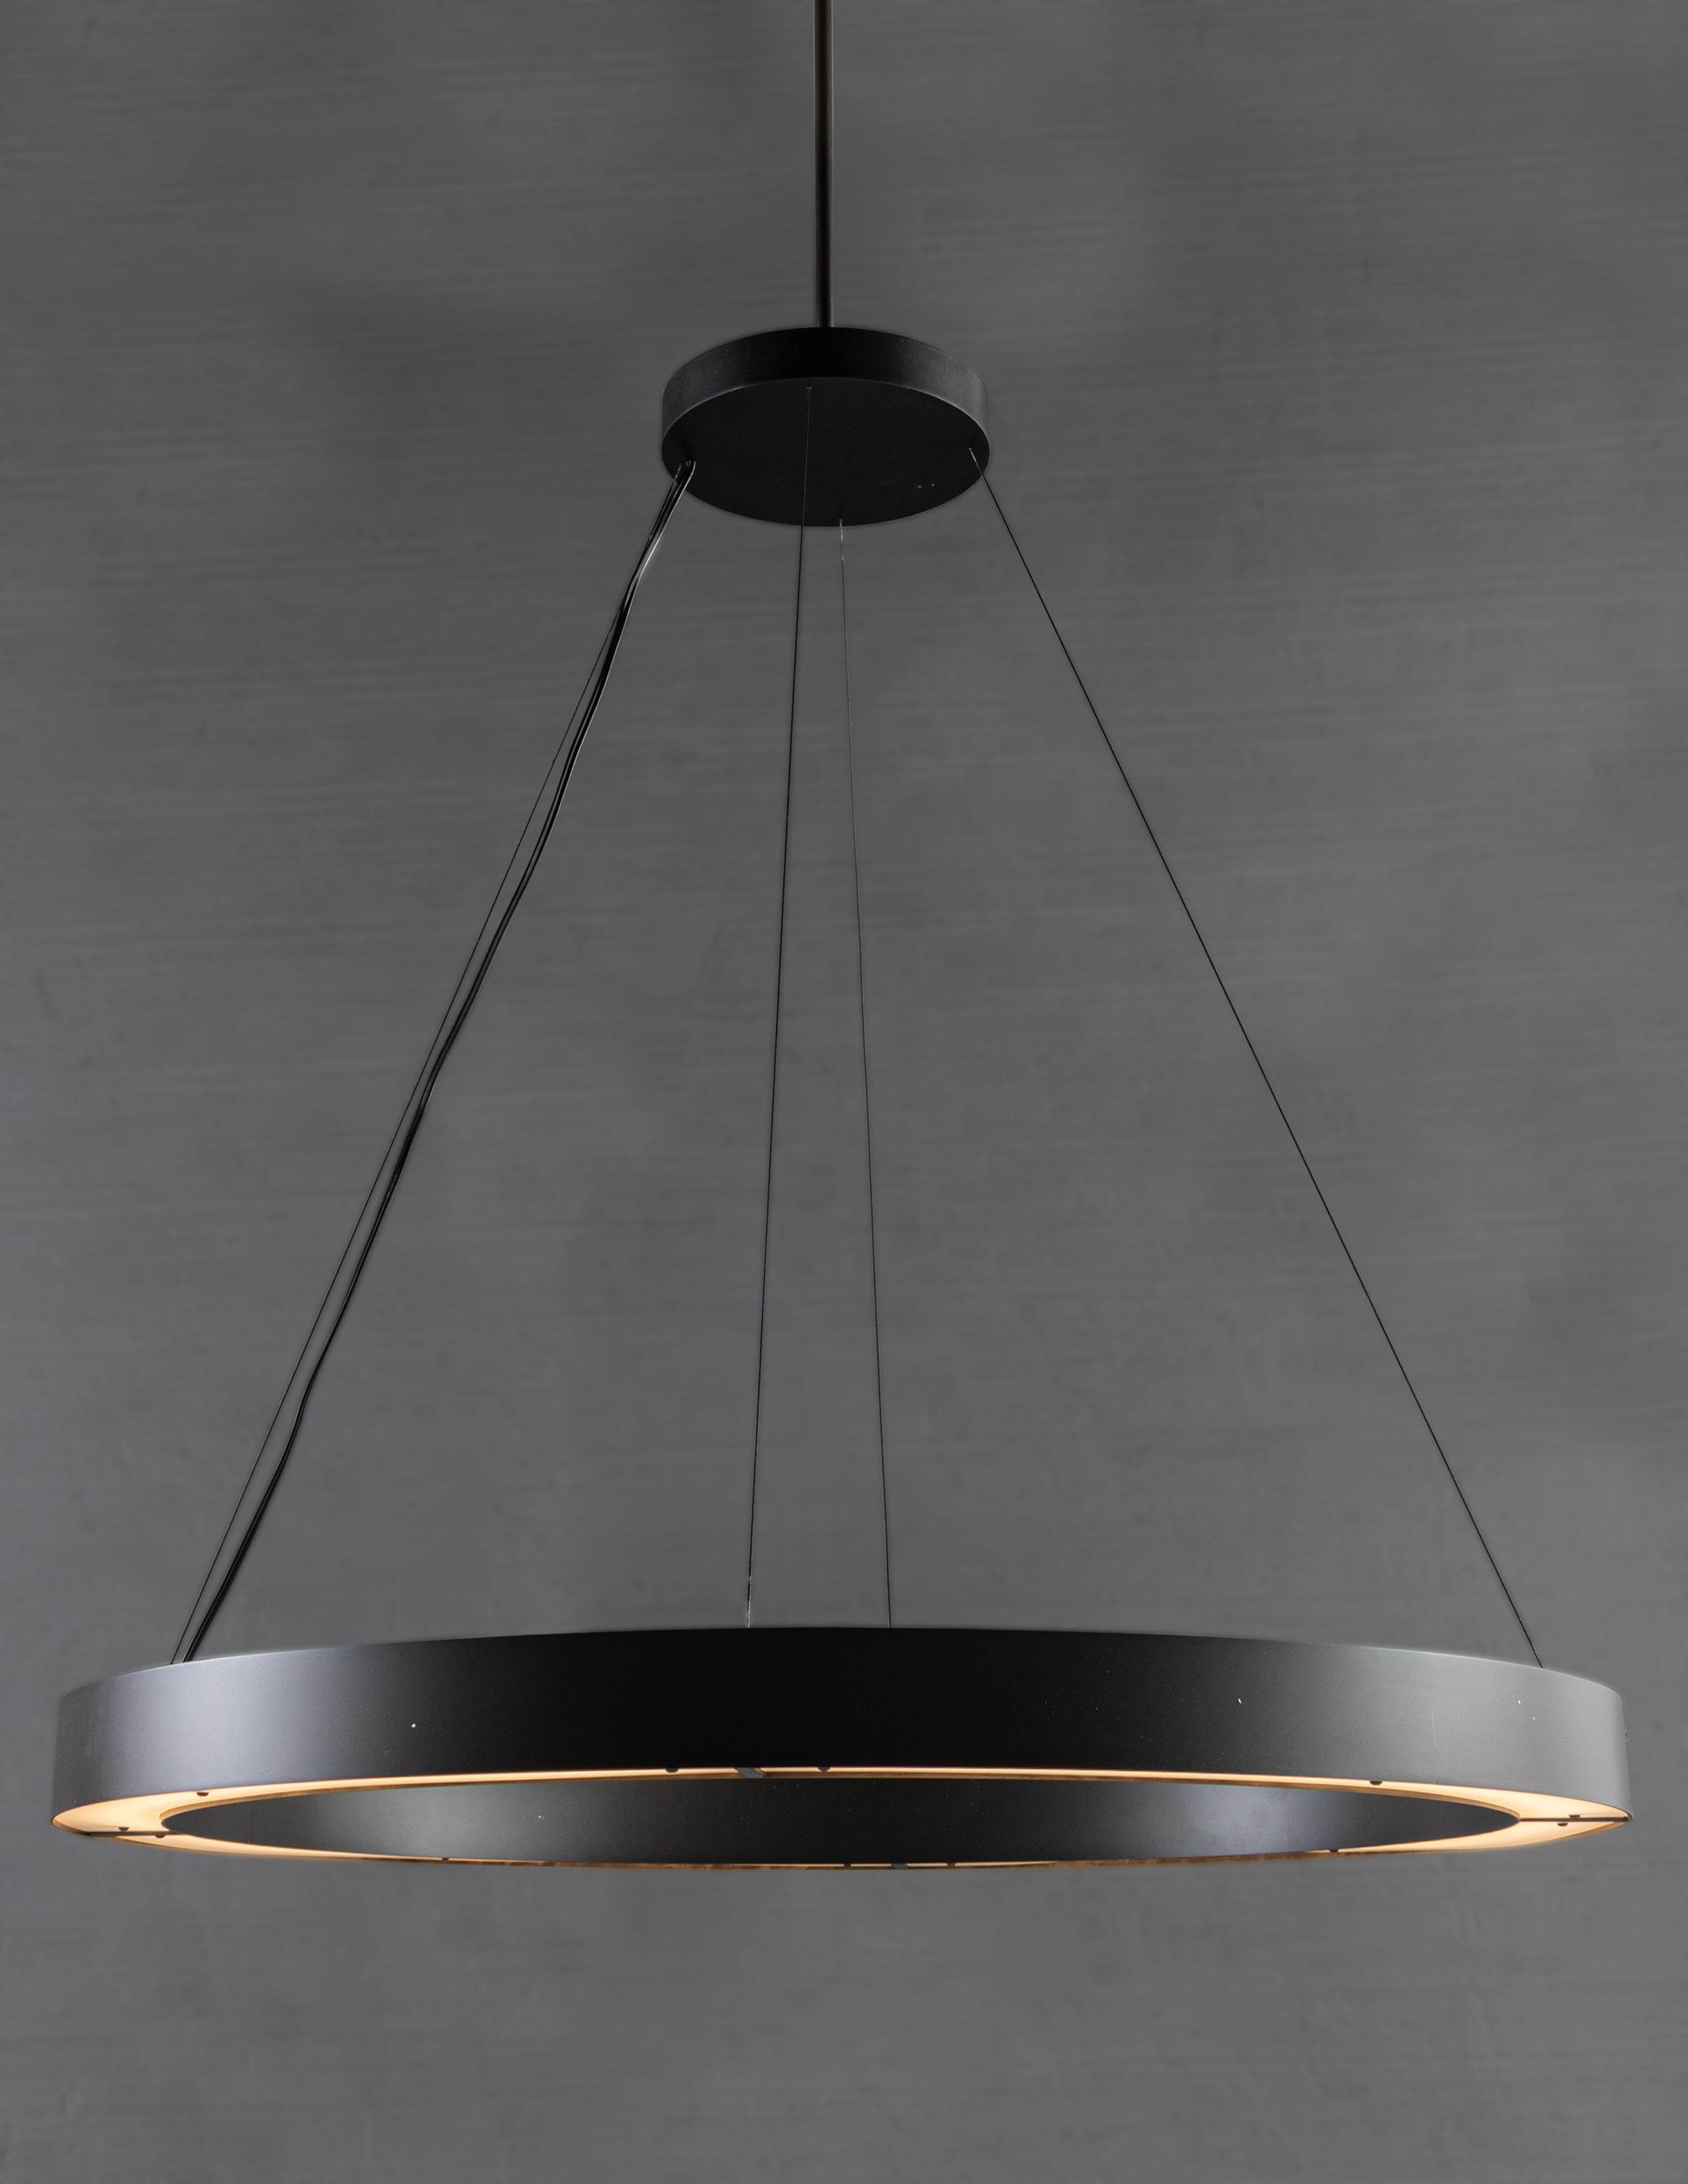 Bulb LED continuous loop.

Bronze tone steel body with steel cable suspension. Height is adjustable 

Handcrafted in Italy. Sold exclusively at Brendan Bass.

Minimum hanging height: 12